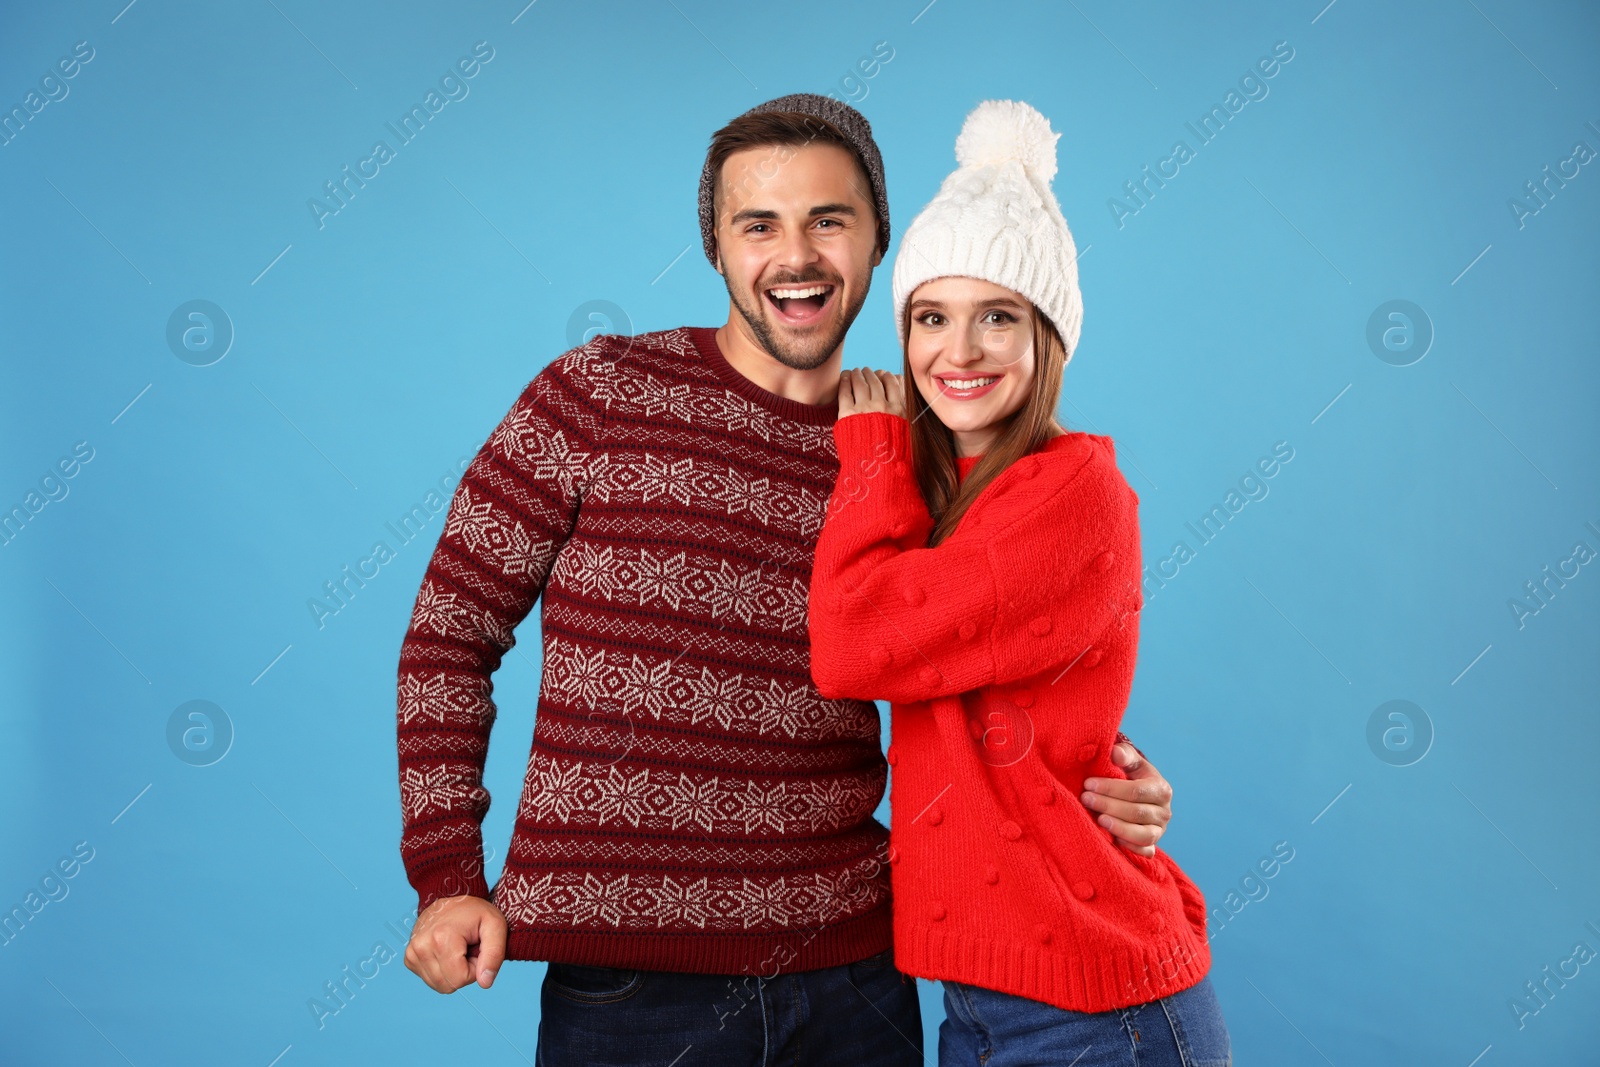 Photo of Couple wearing Christmas sweaters and hats on blue background